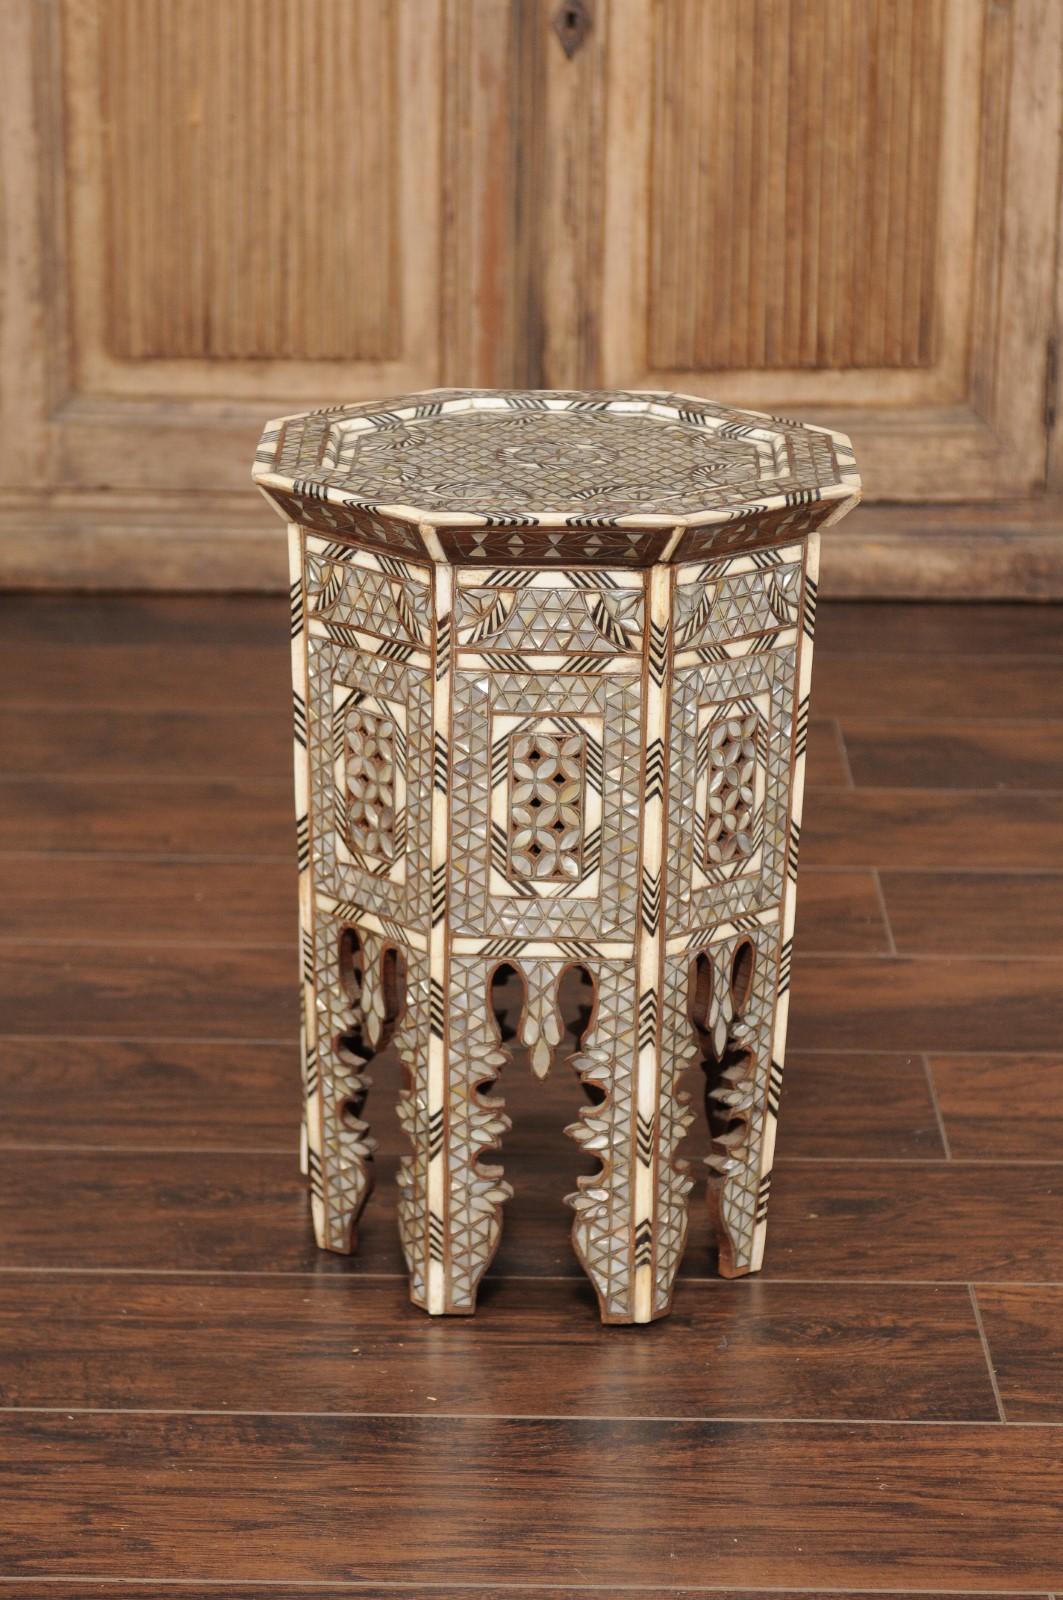 A Syrian hexagonal Moorish style side table with mother of pearl and bone inlay. Capturing our attention with its striking silhouette, this Moorish style side table features an exquisite décor, where no area is left untouched, evoking the 